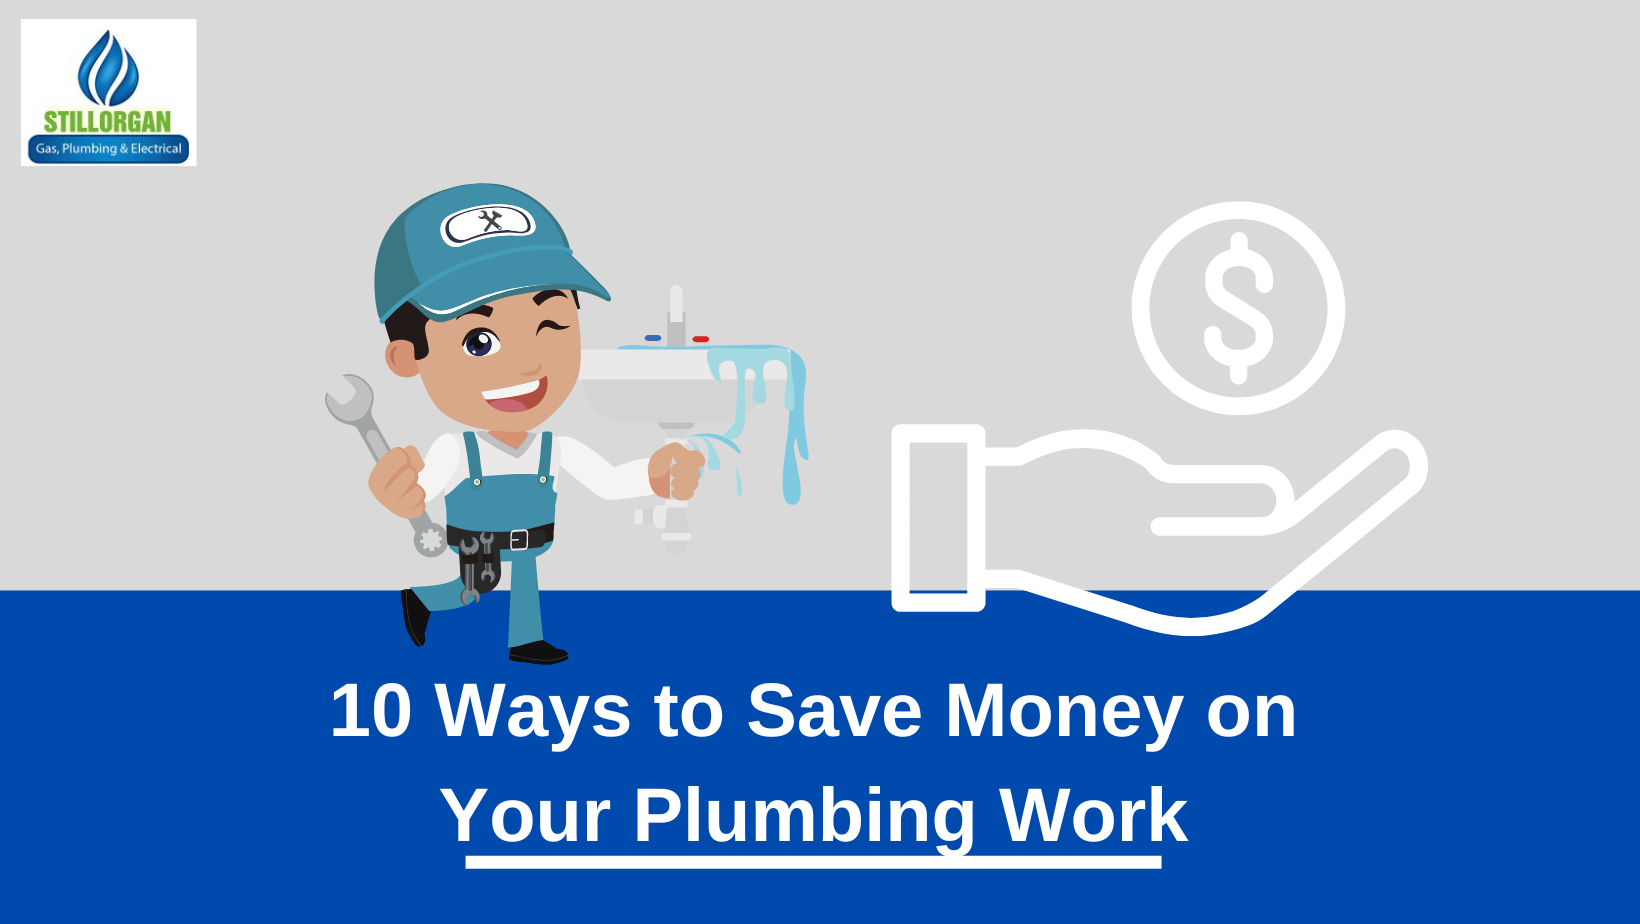 10 Ways to save money on your plumbing work